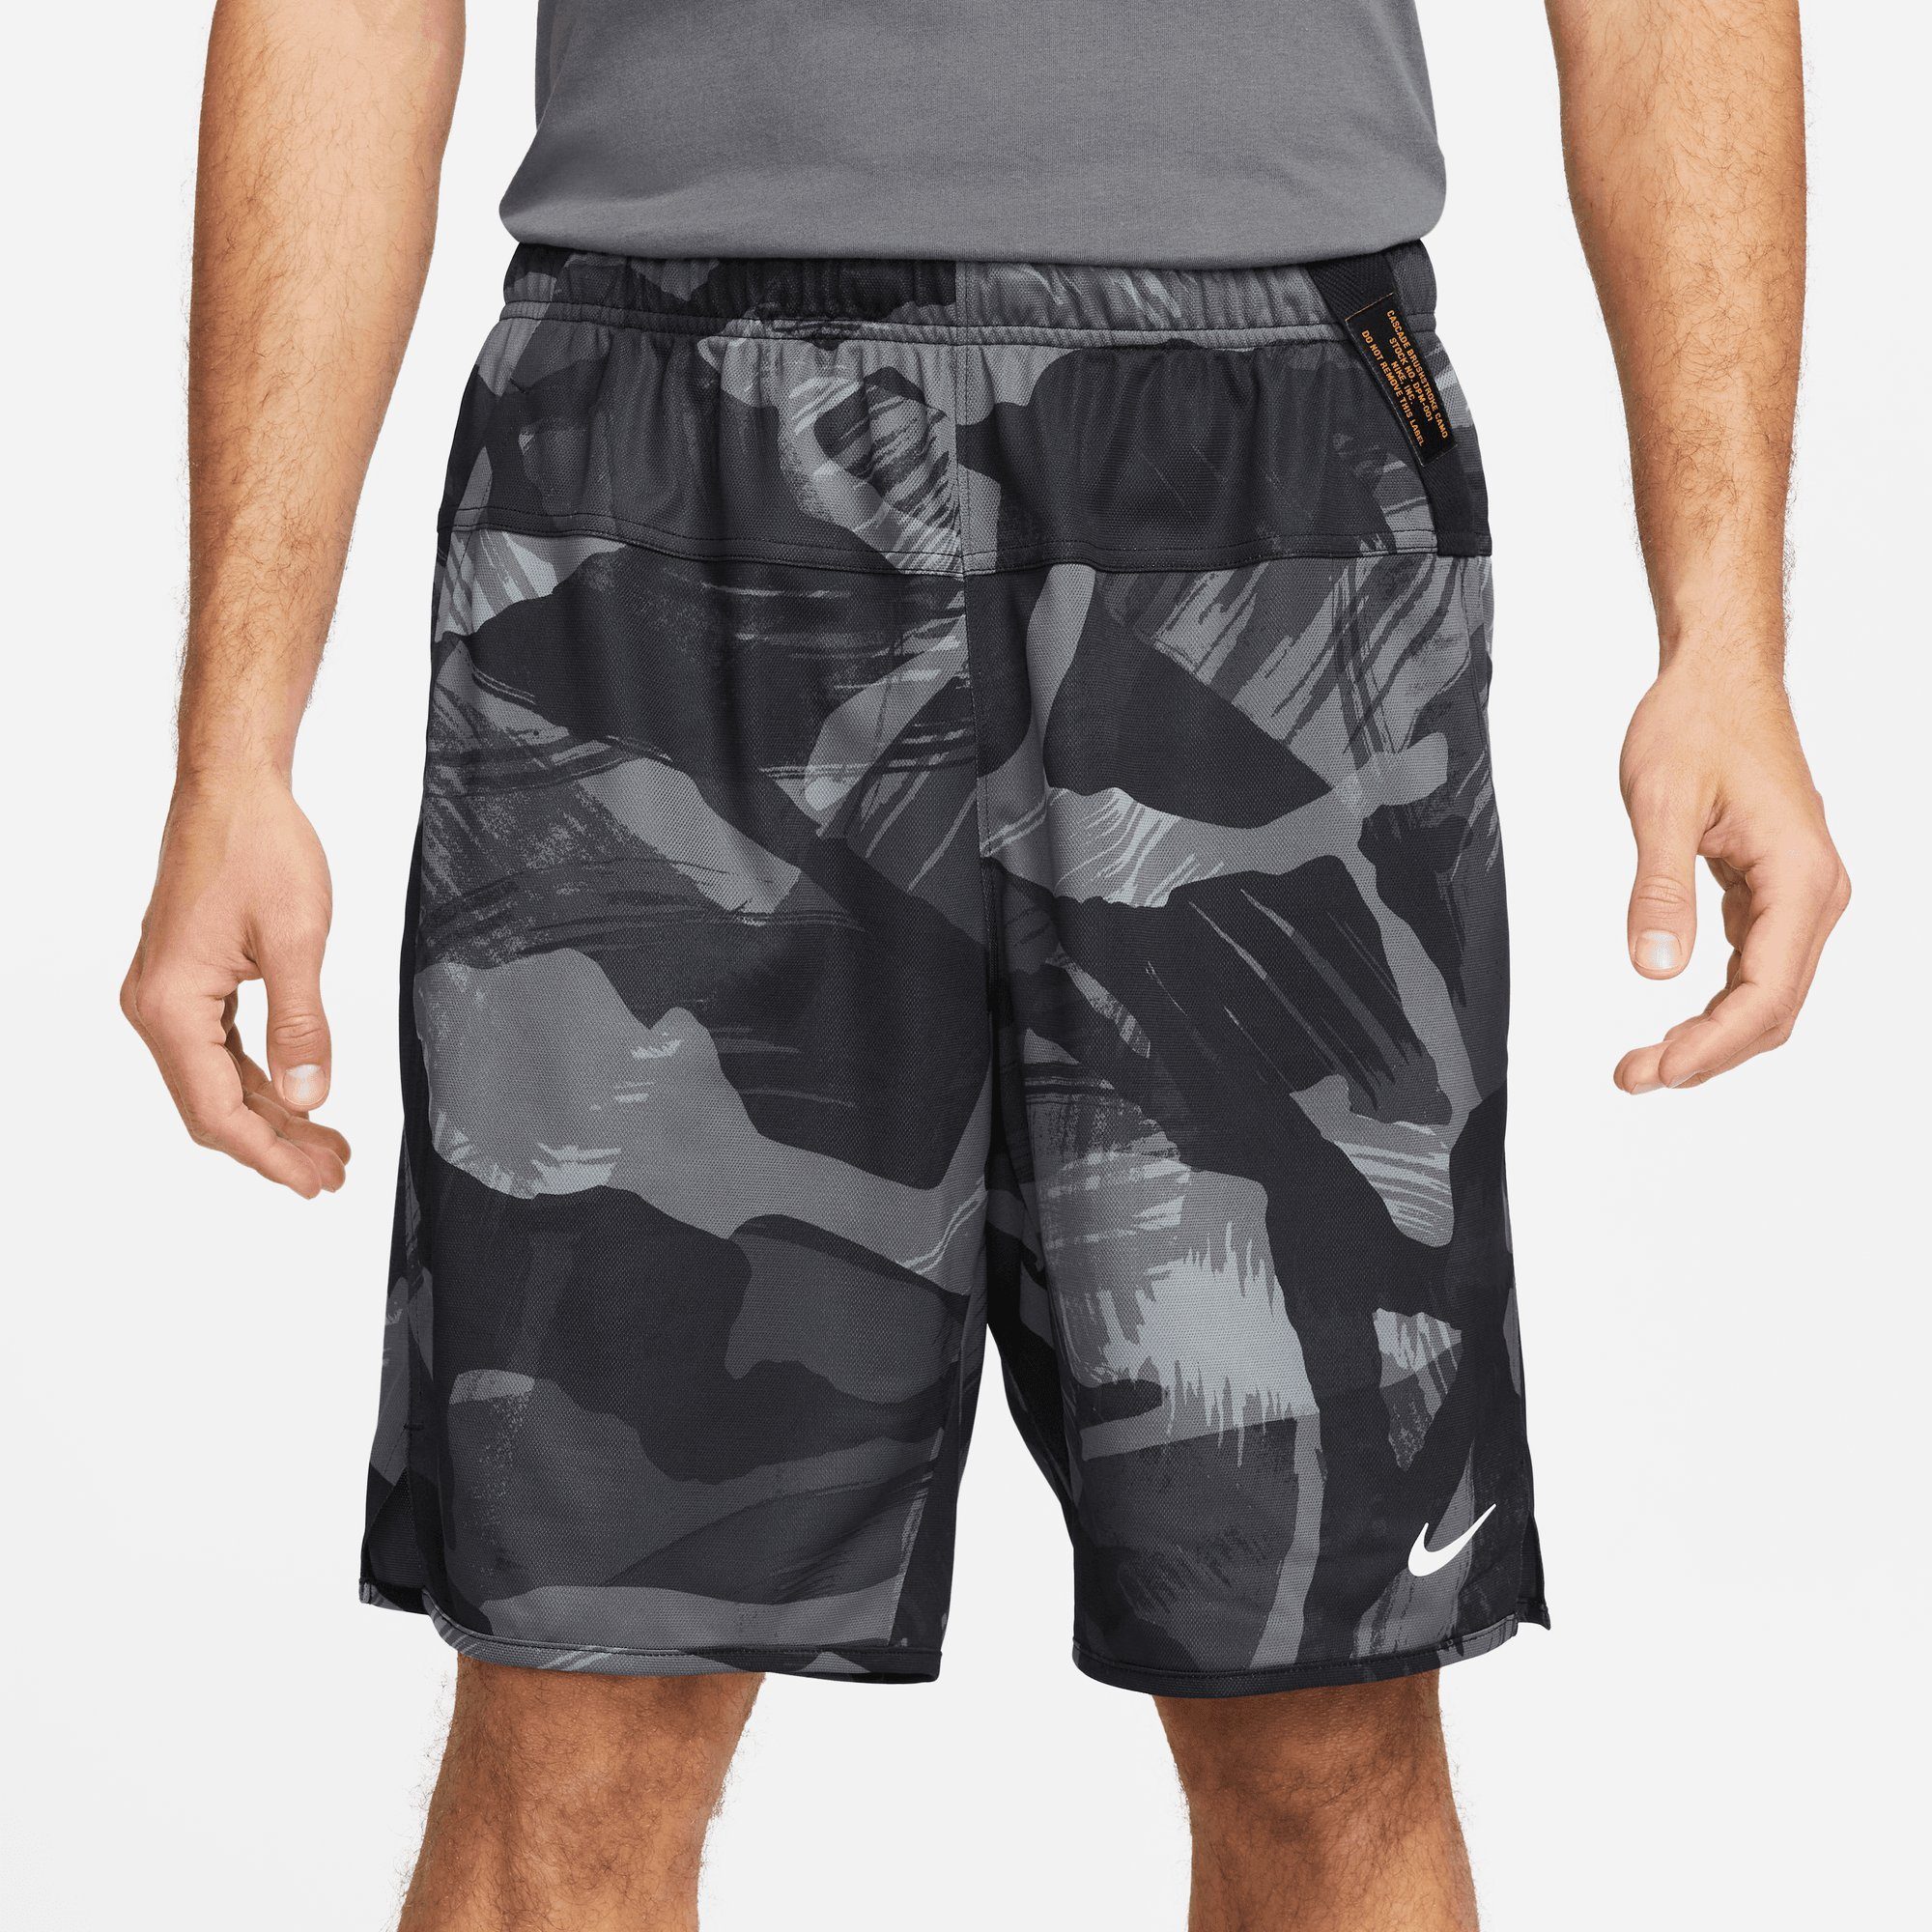 MILK TOTALITY SUEDE/COCONUT FITNESS MEN'S Trainingsshorts DRI-FIT CAMO SHORTS " UNLINED BLACK/GOLD Nike